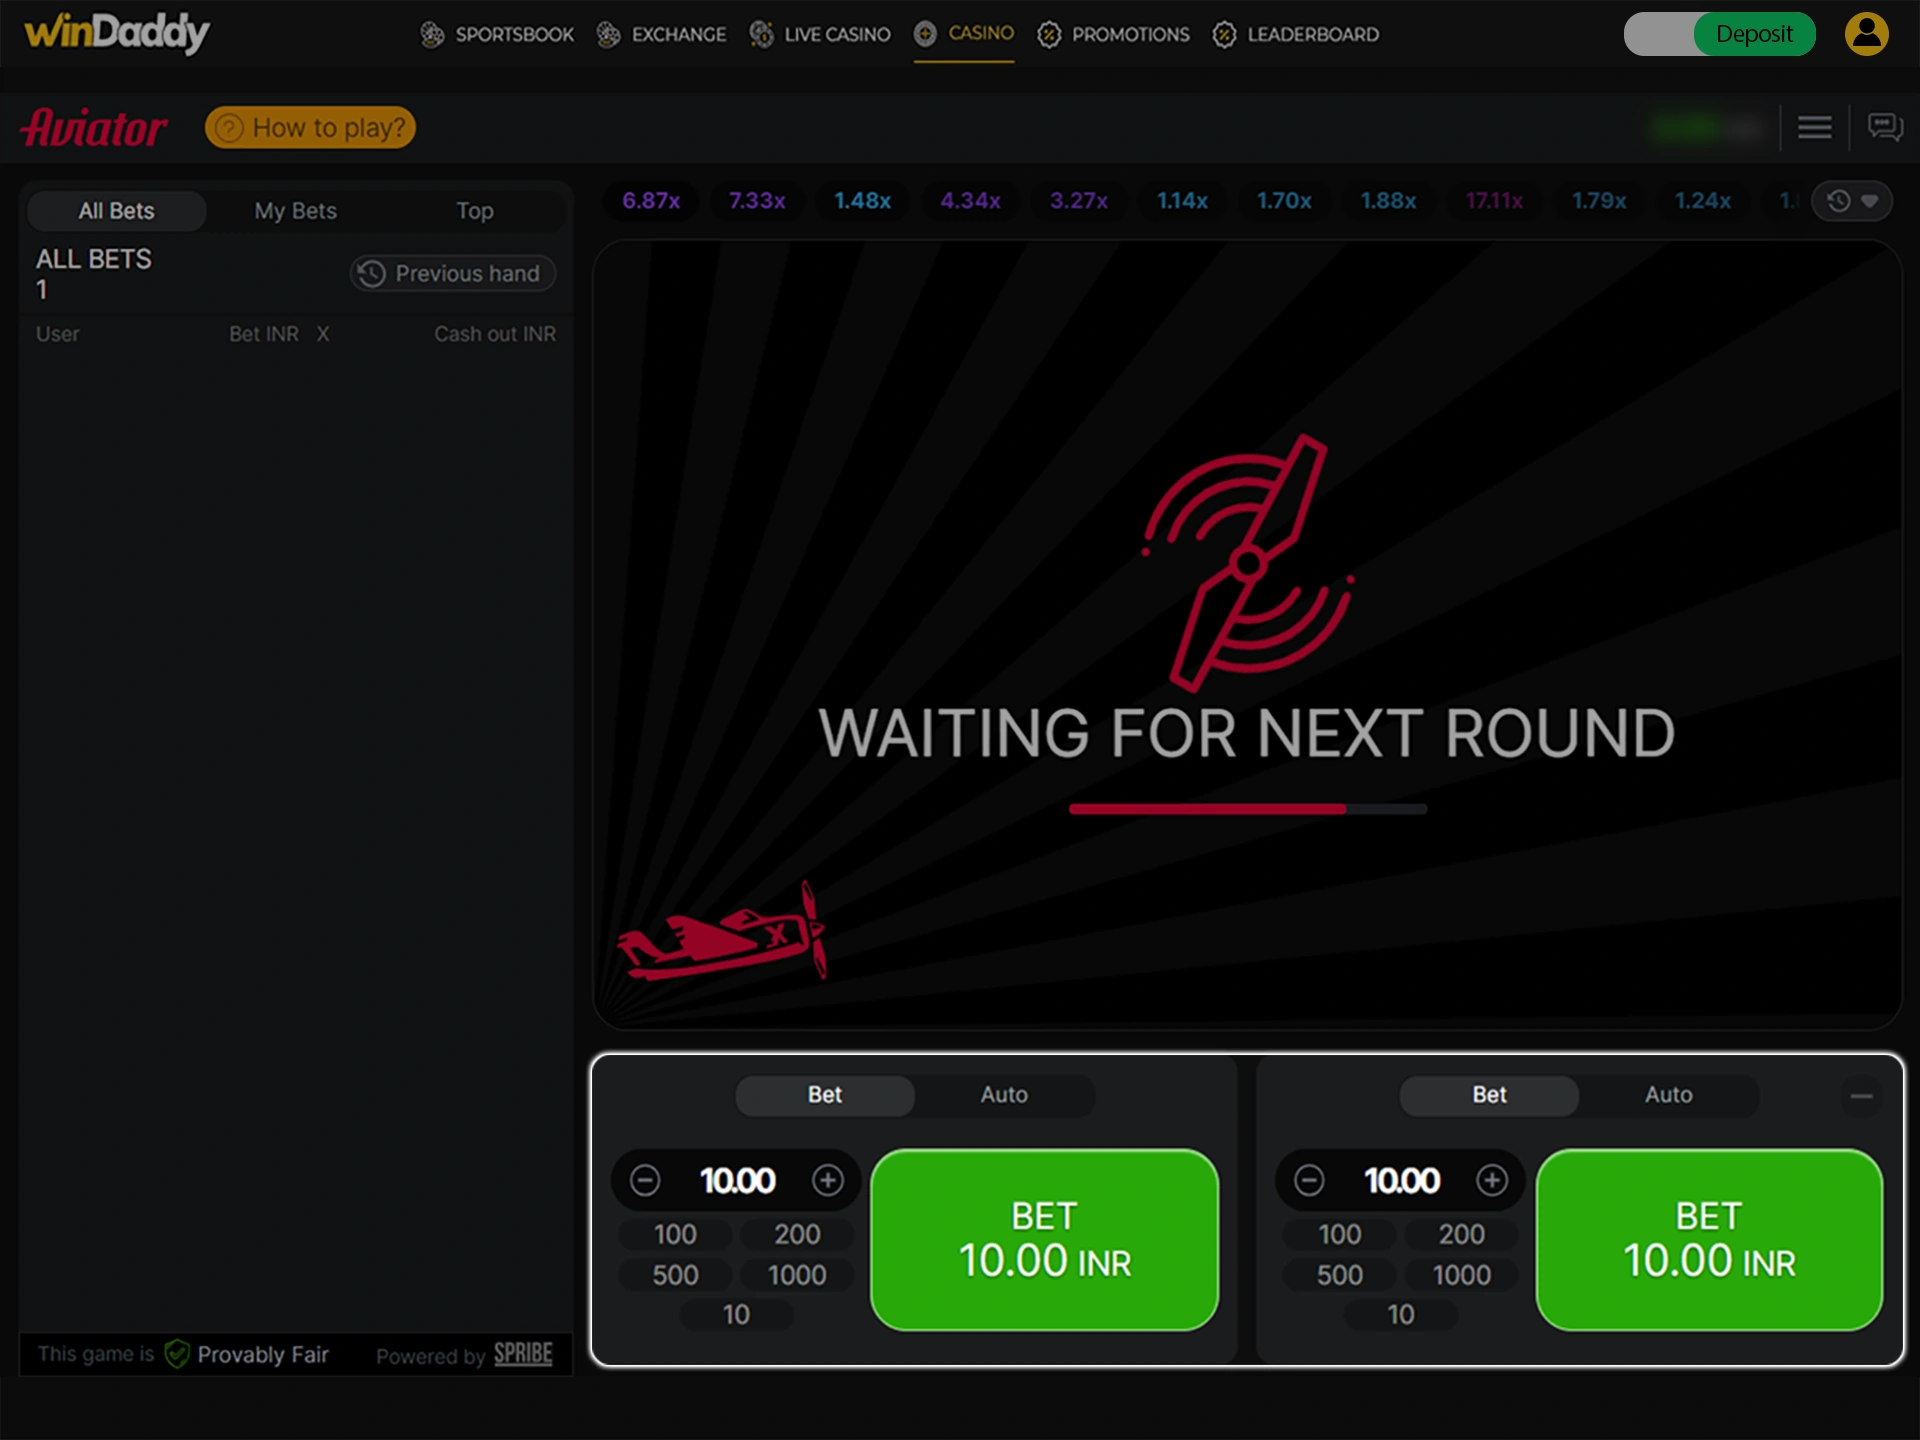 Specify the amount and click the button to bet in the Aviator game at Windaddy.